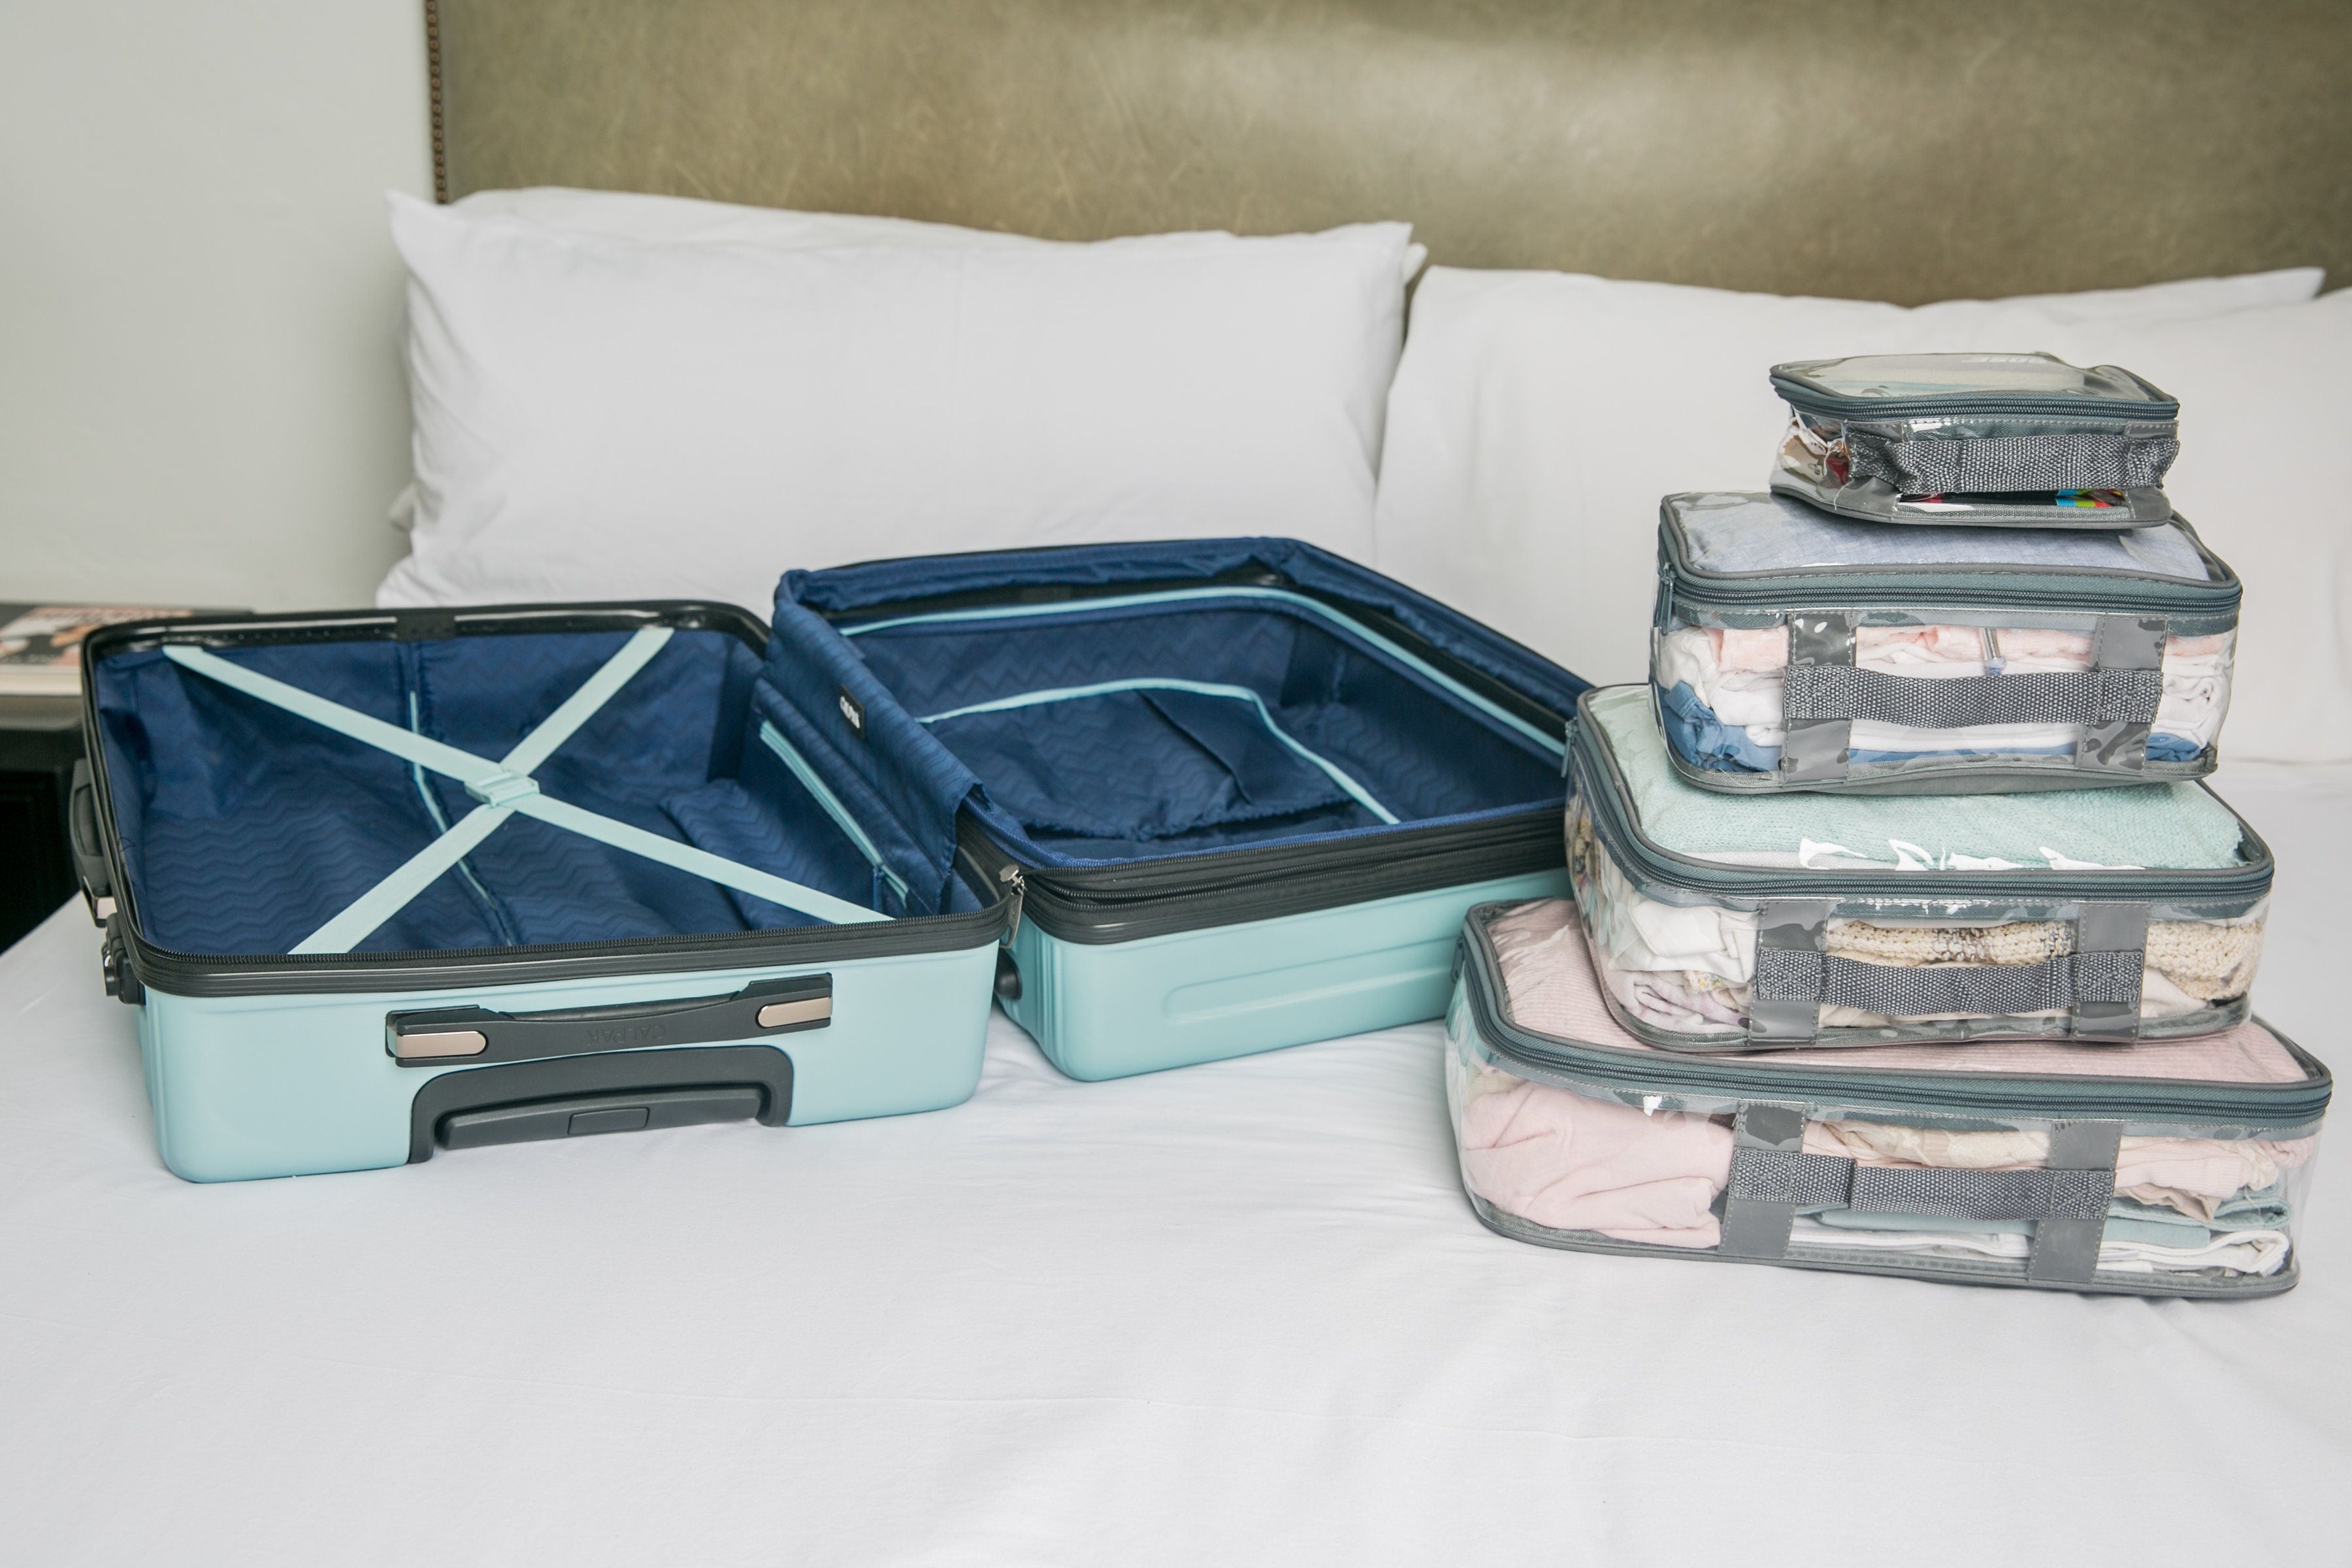 Carry on suitcase and starter set packing cubes